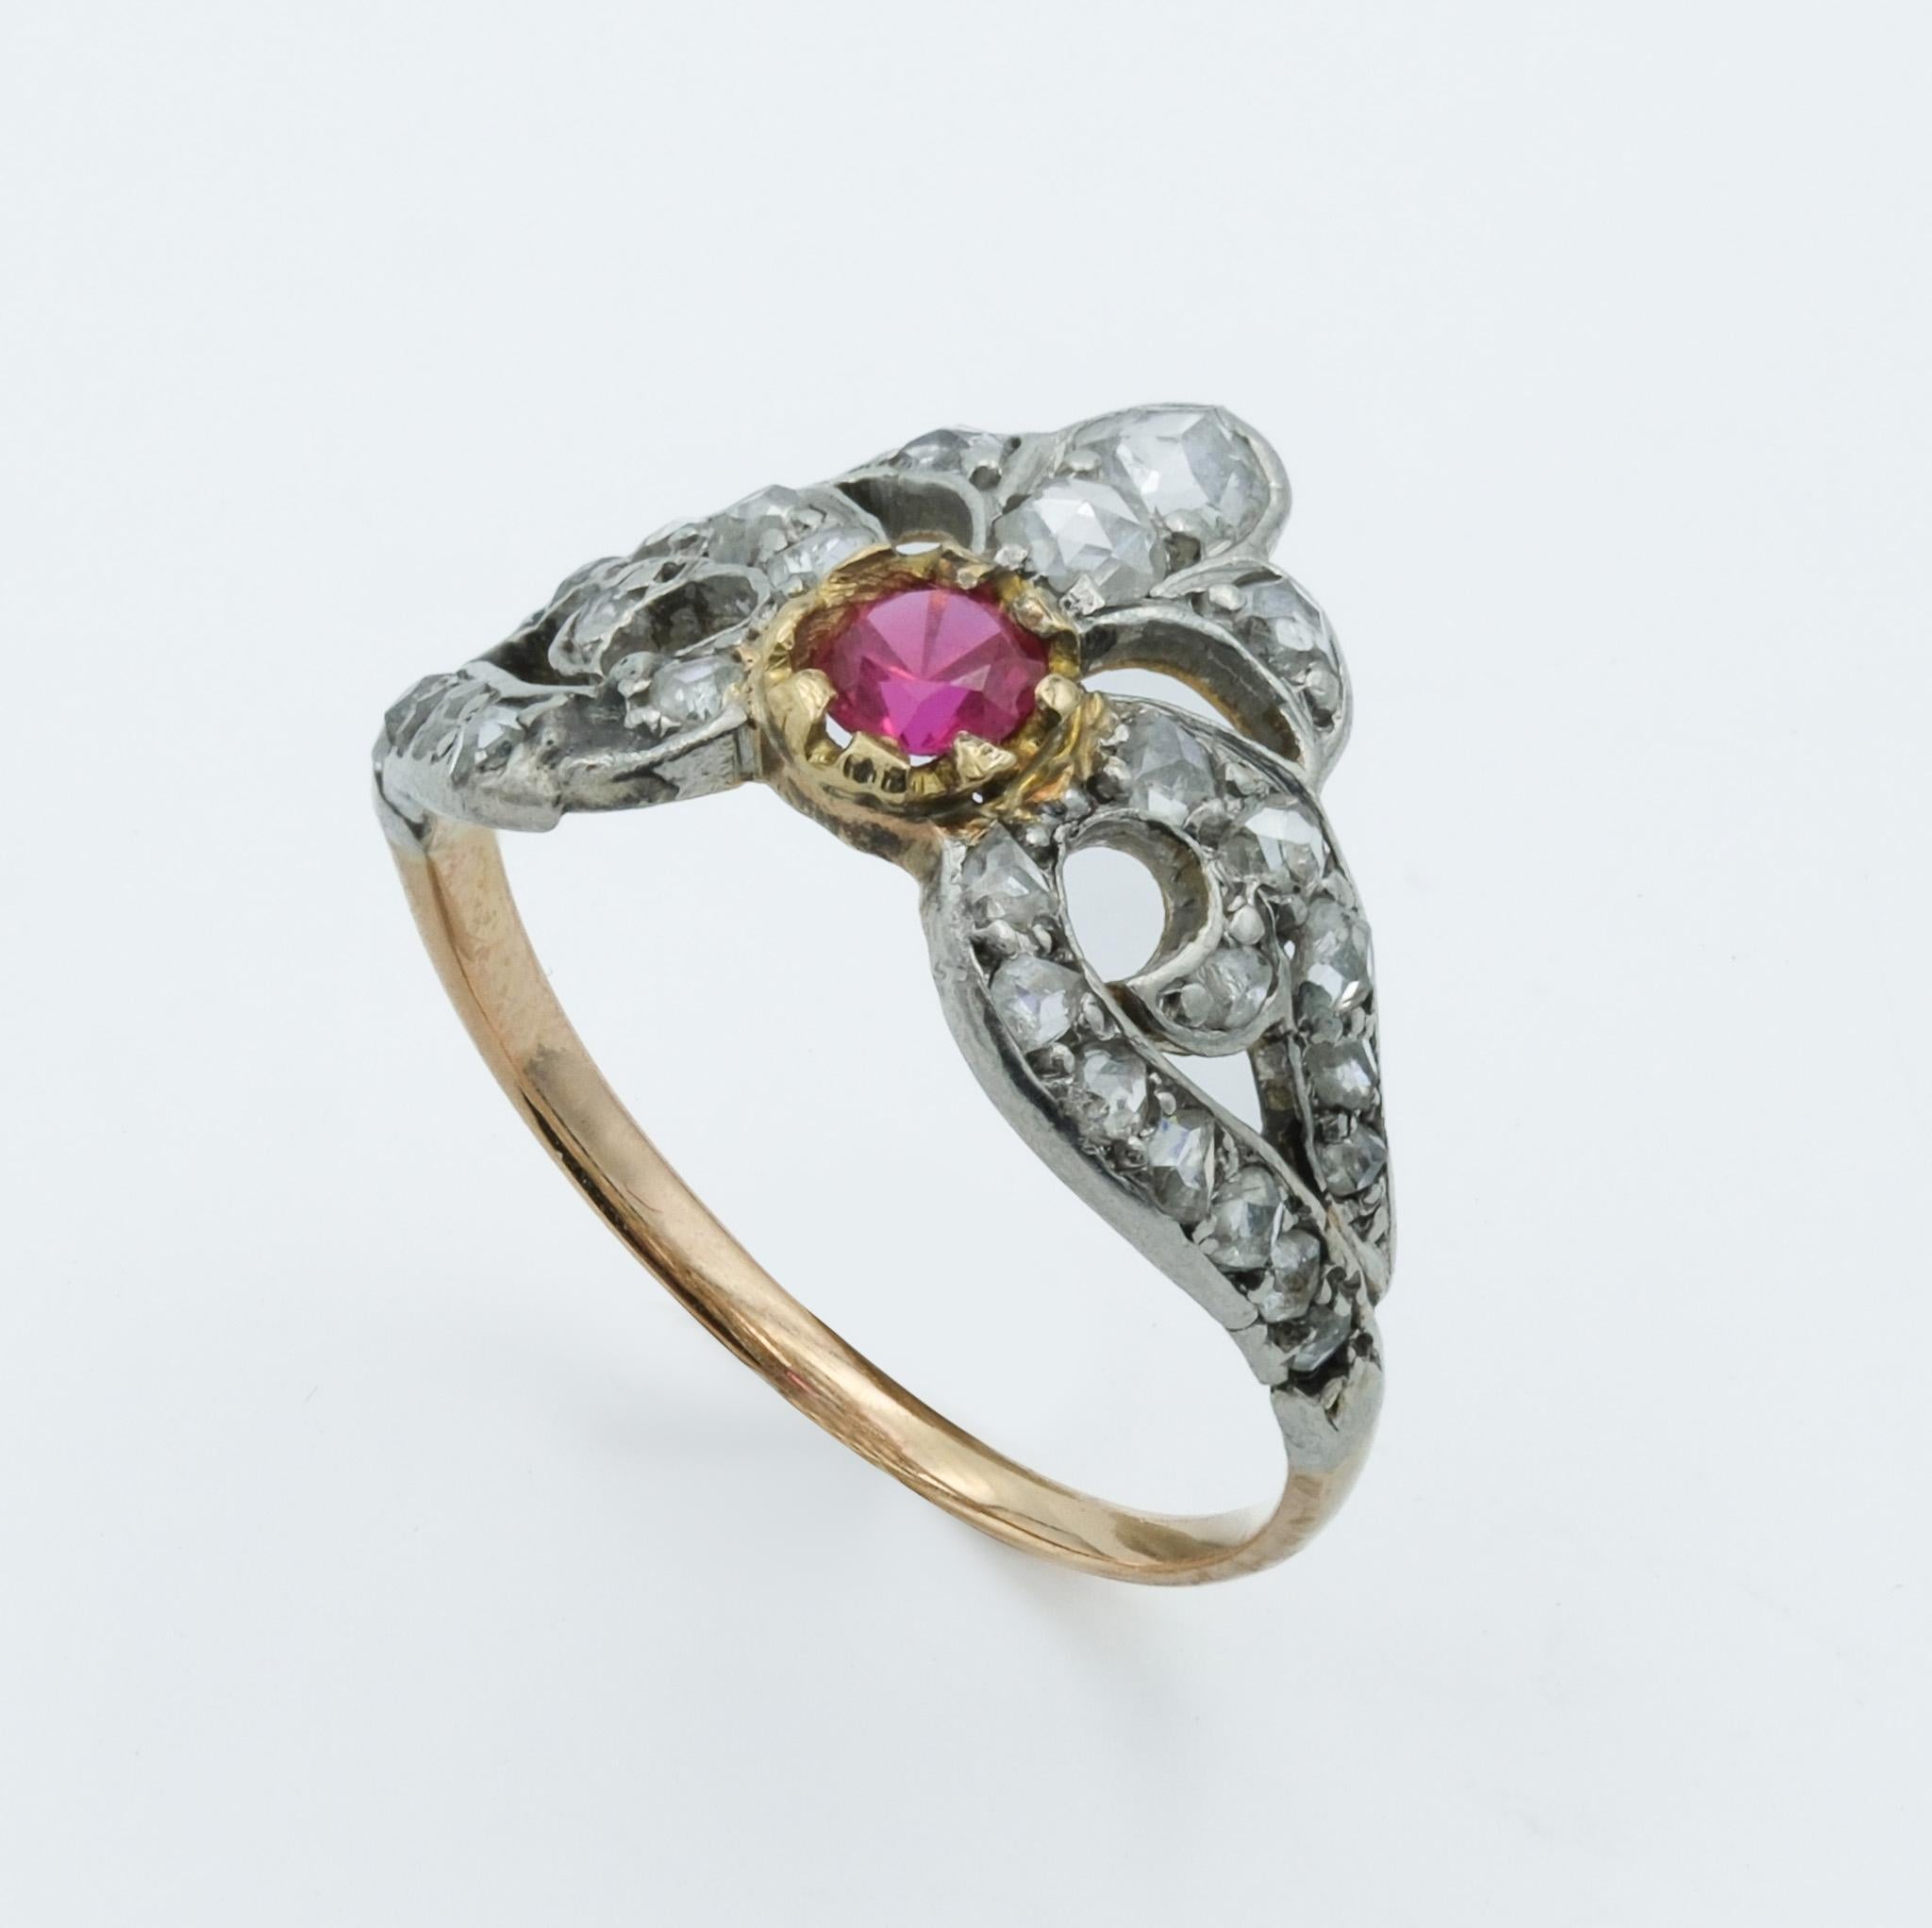 This Victorian-era ring presents a stunning combination of 18 karat rose gold and platinum, a testament to the period's craftsmanship. The ring features a central synthetic ruby, approximately 0.1 carat, set in a rich yellow gold bezel. This ruby is